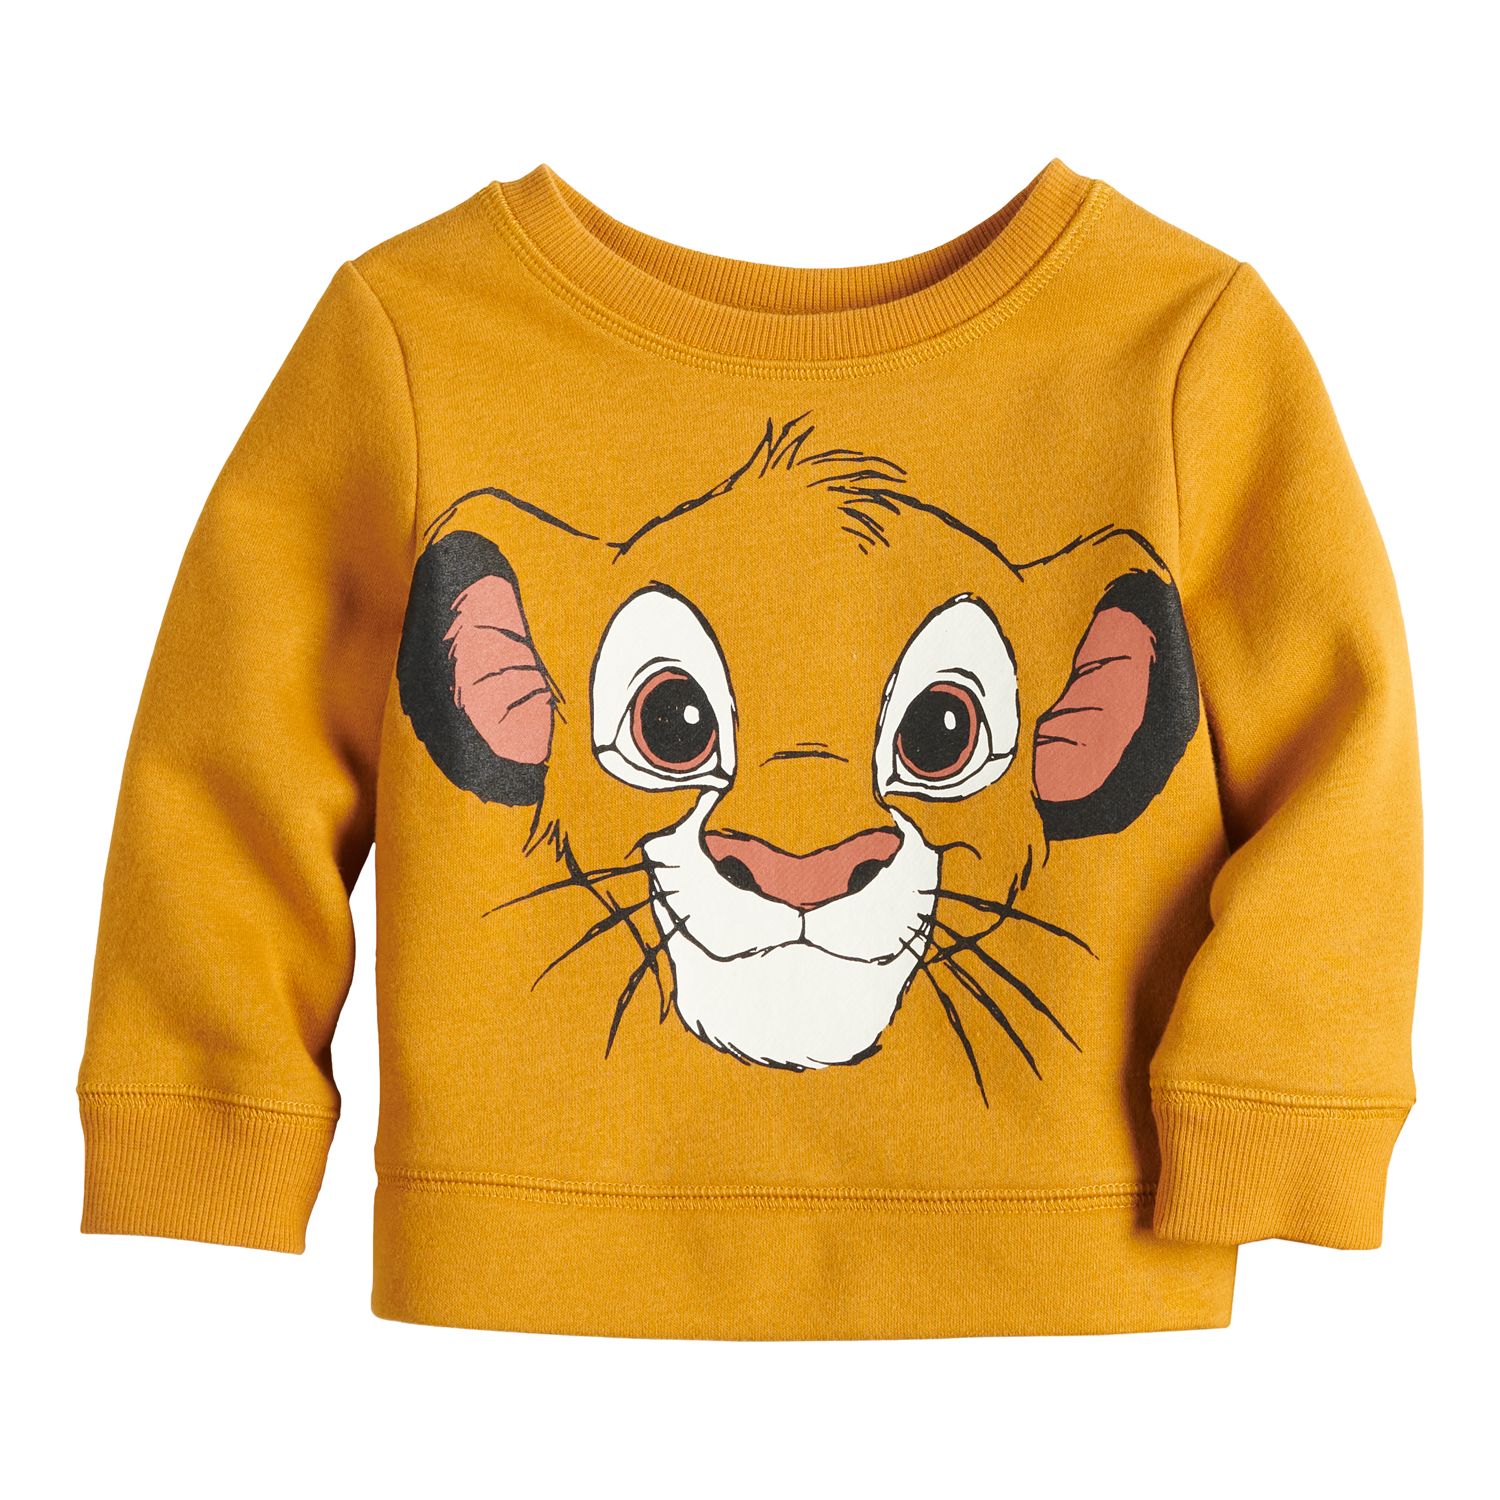 Image for Disney/Jumping Beans Disney's The Lion King Simba Baby Boy Pullover Fleece Top by Jumping Beans® at Kohl's.